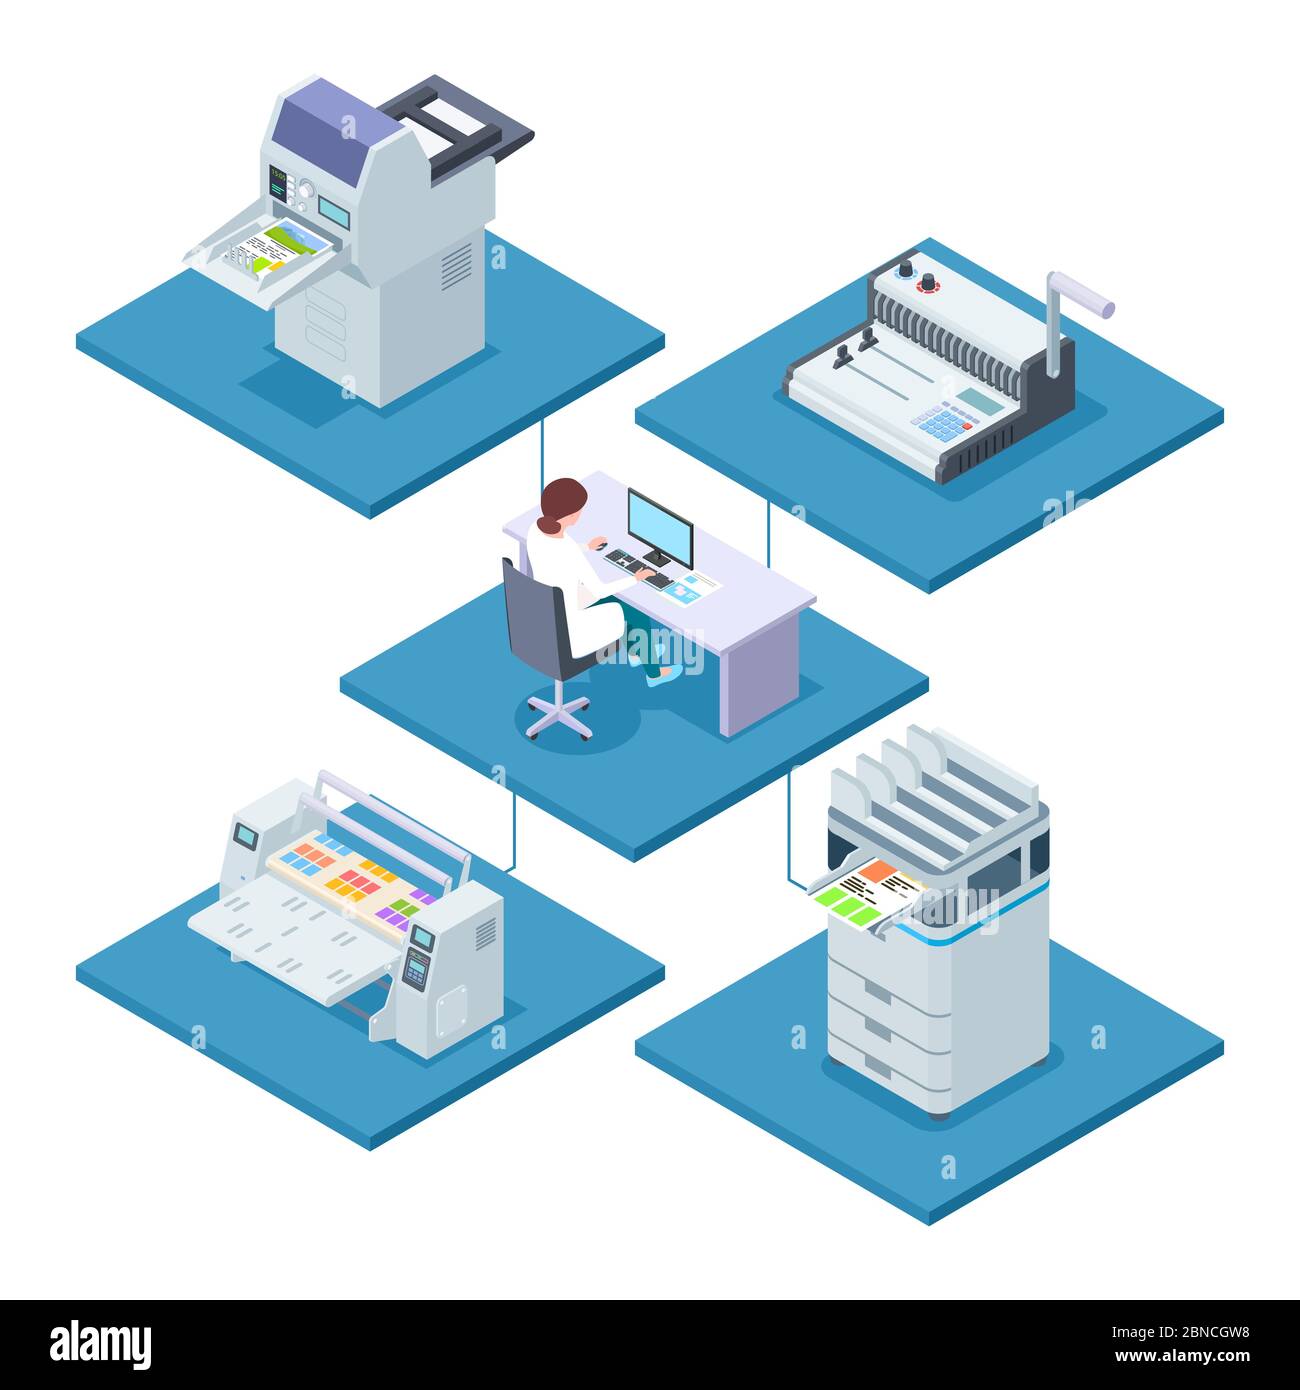 Printing house with woman opertator isometric vector concept. Woman control processing printer and multifunction electronic printshop illustration Stock Vector